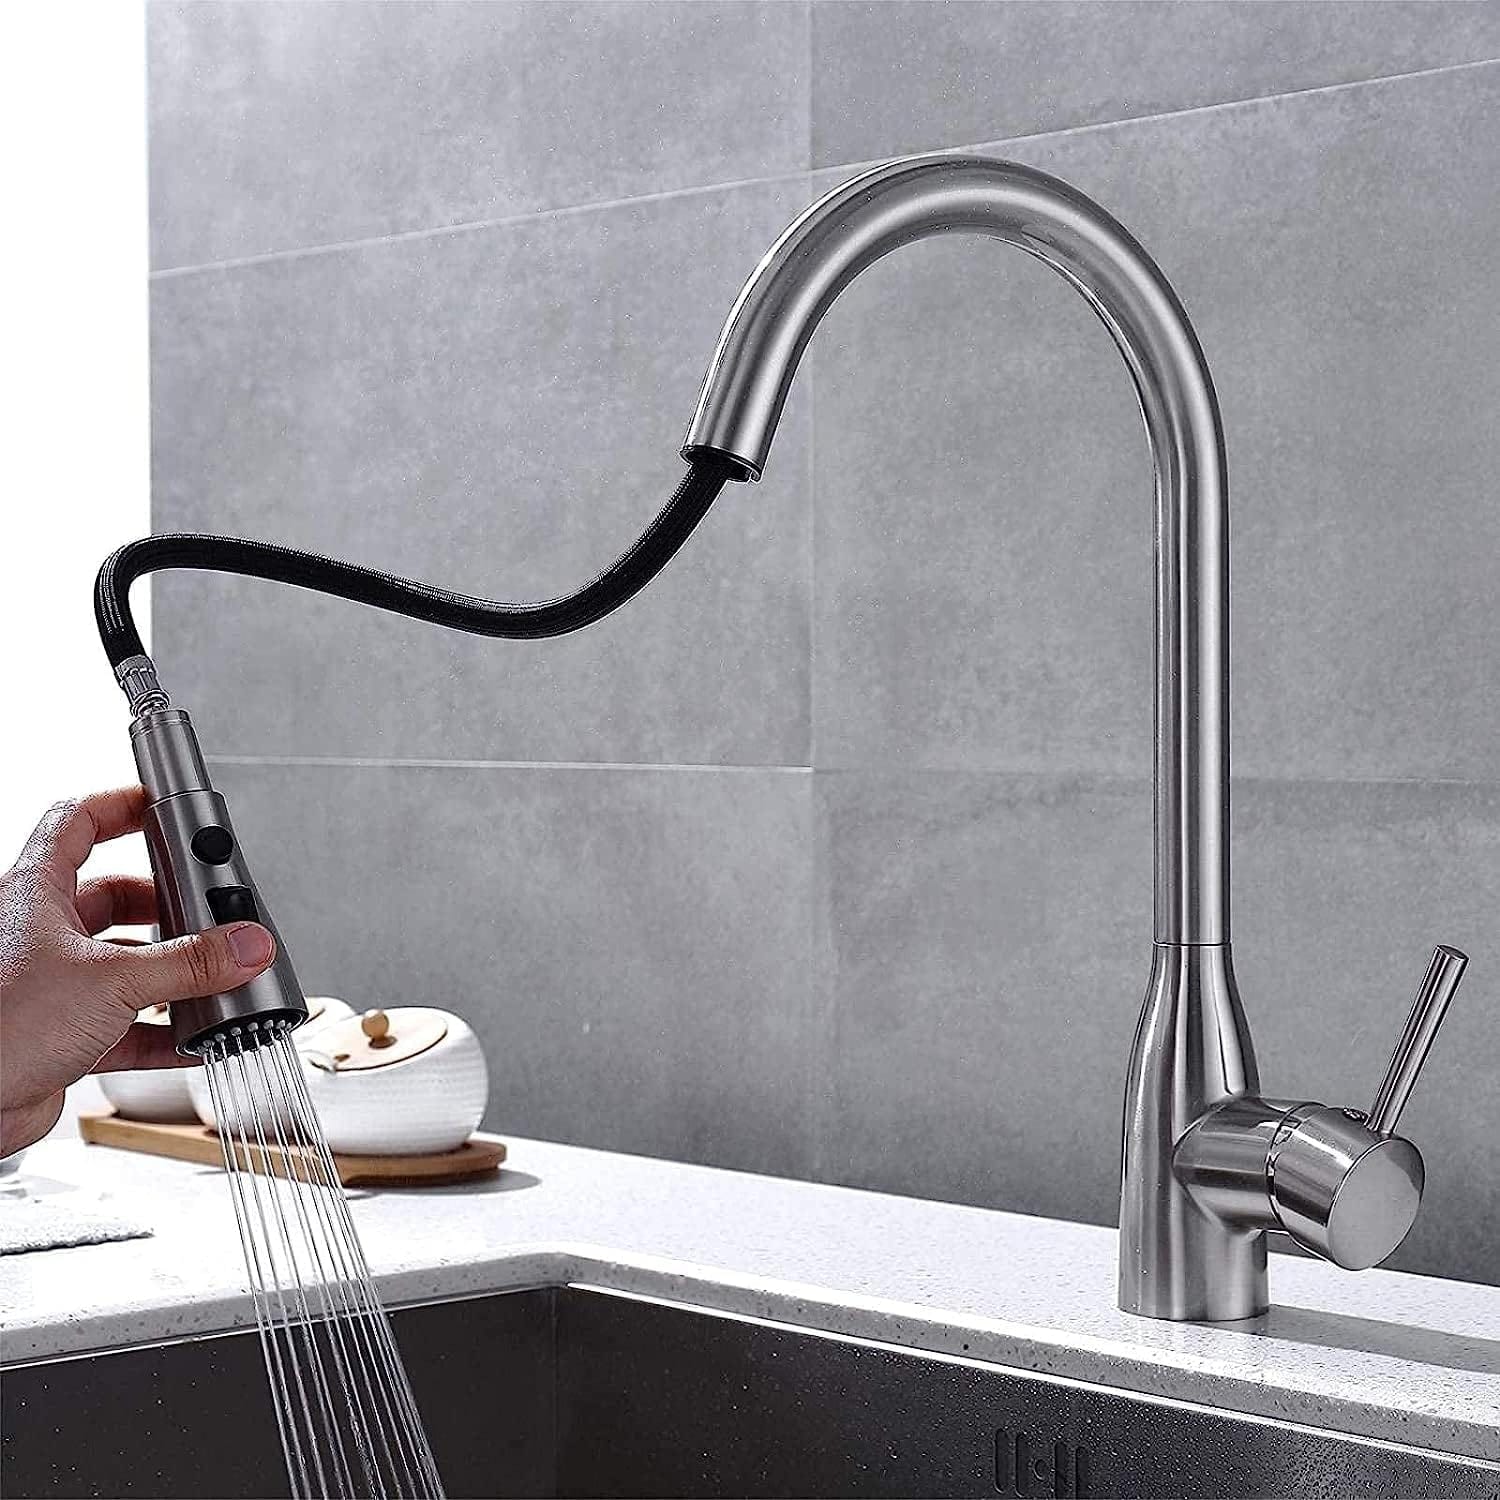 Buy Stainless Steel Satin Nickel Pull Out Sprayer Kitchen Sink Faucet Tap - P02001BN | Shop at Supply Master Accra, Ghana Kitchen Tap Buy Tools hardware Building materials